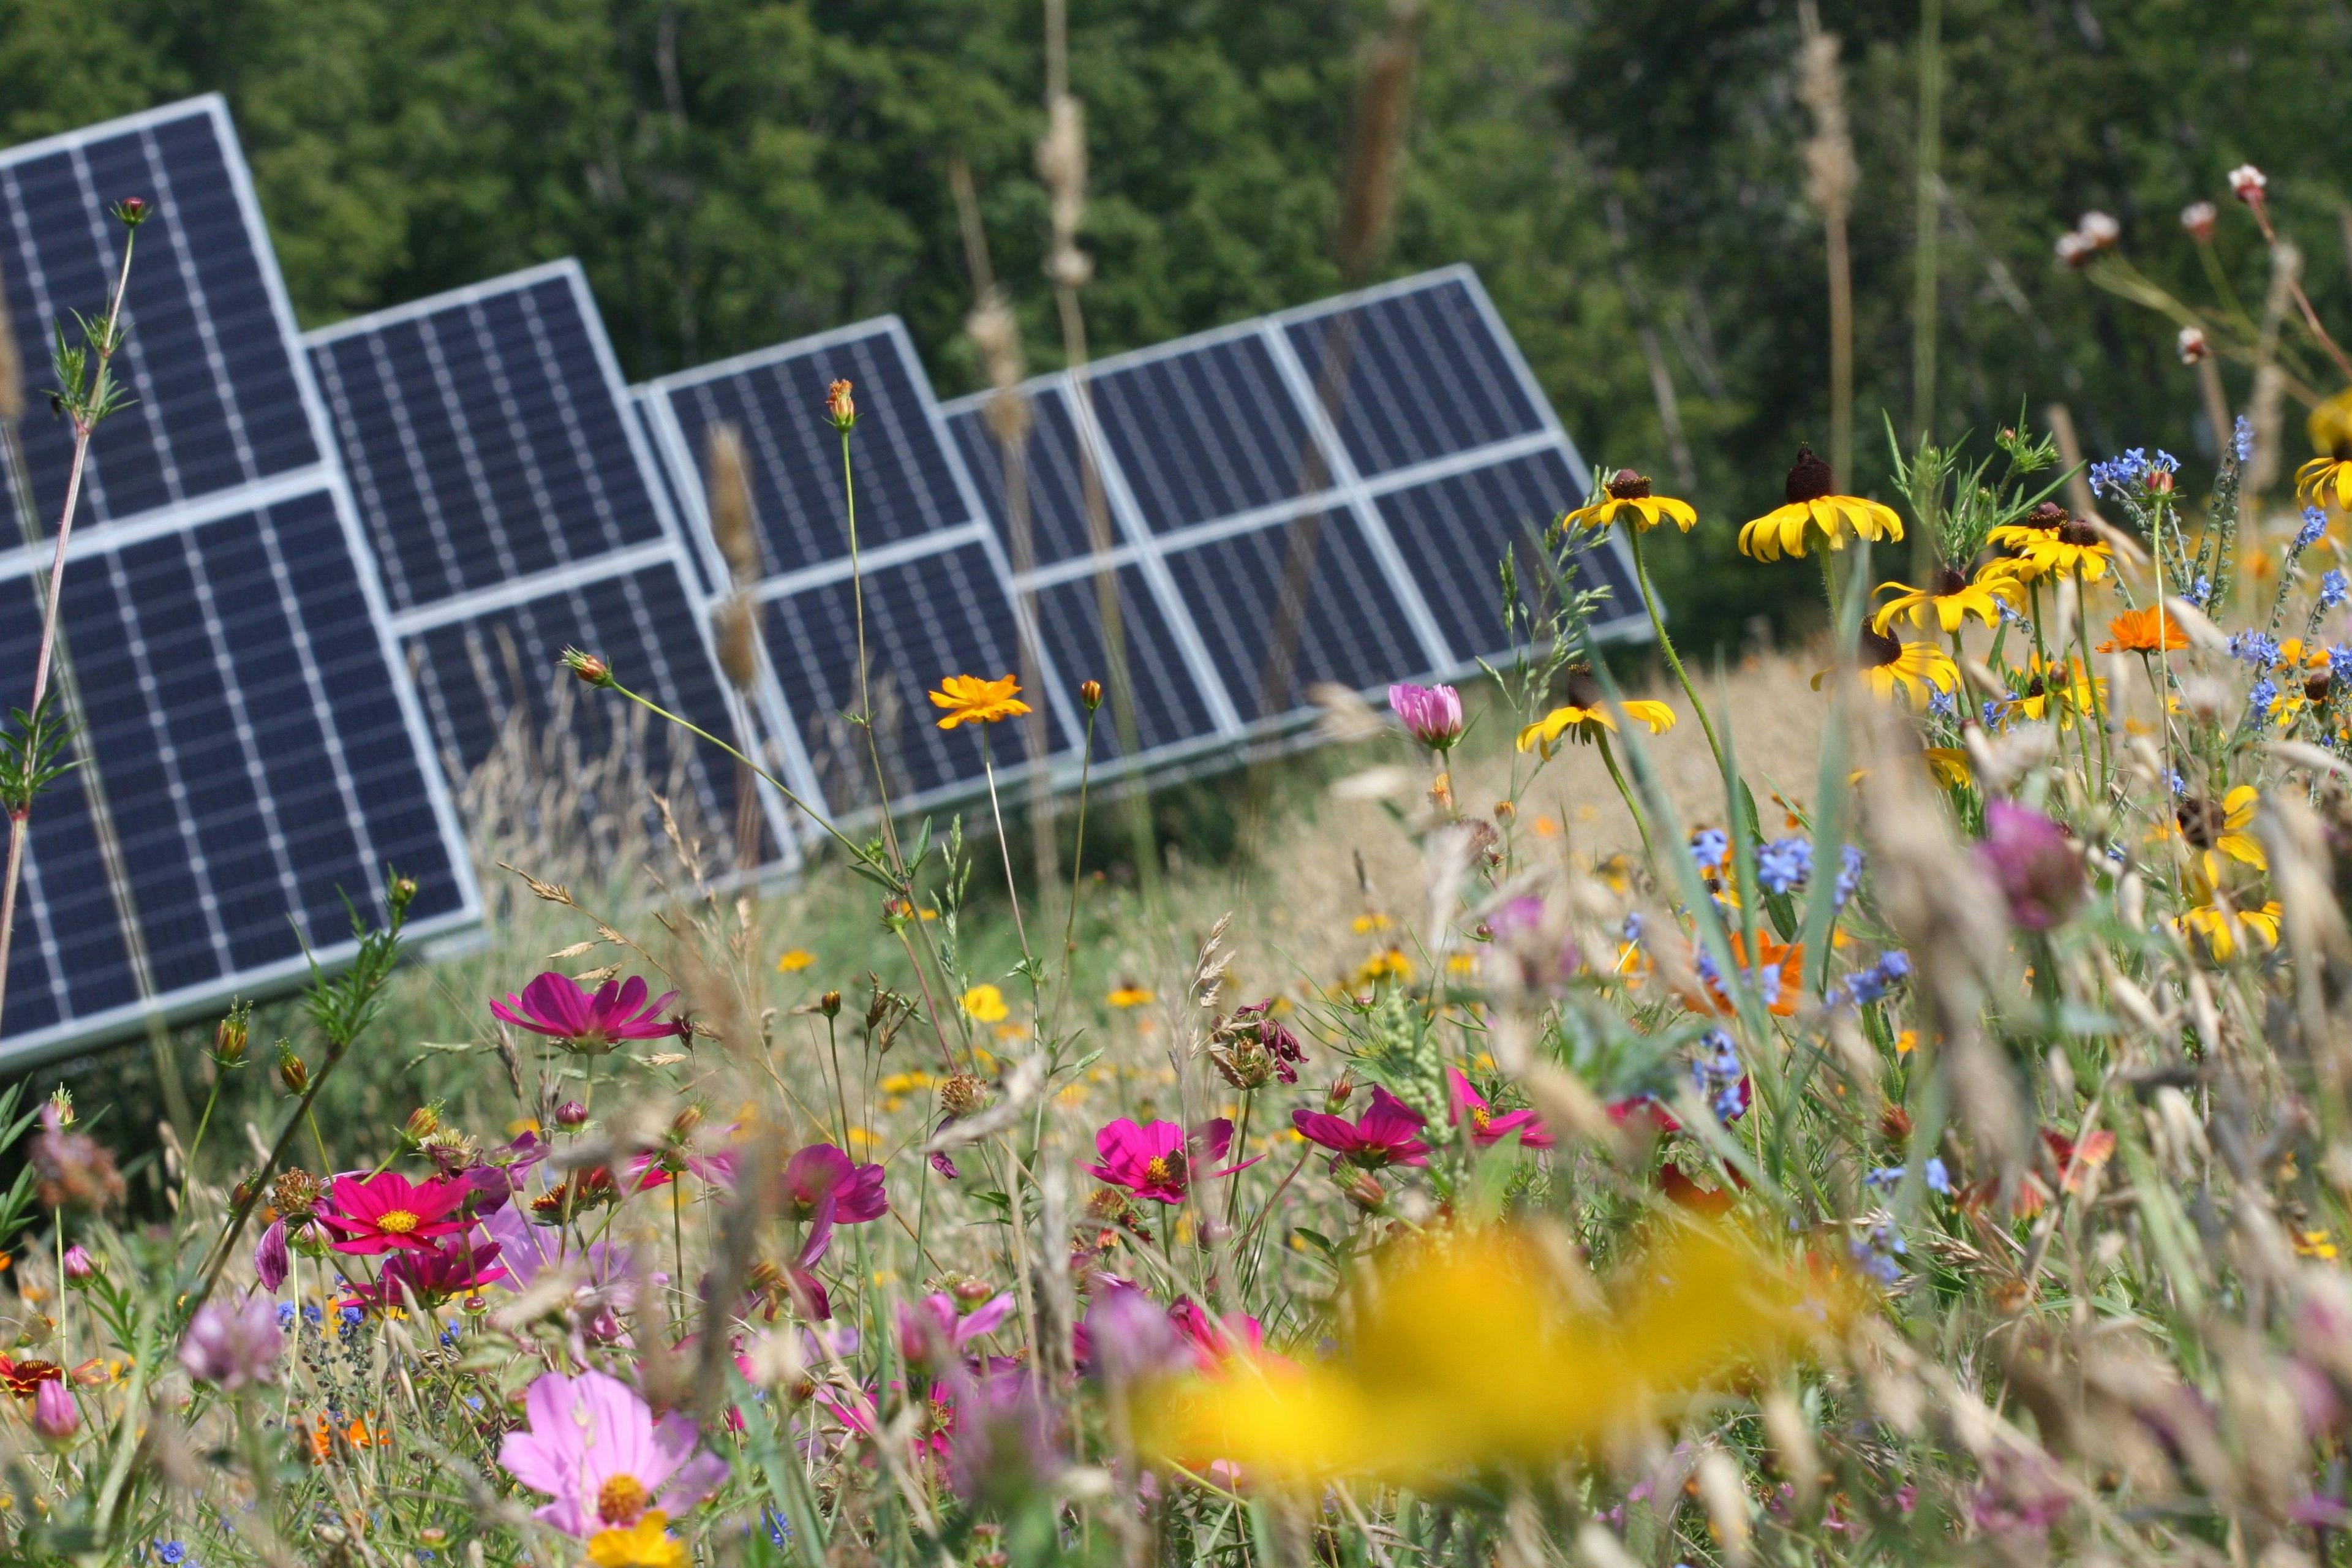 Wildflowers are shown in front of solar arrays in this Fresh Energy courtesy photo.